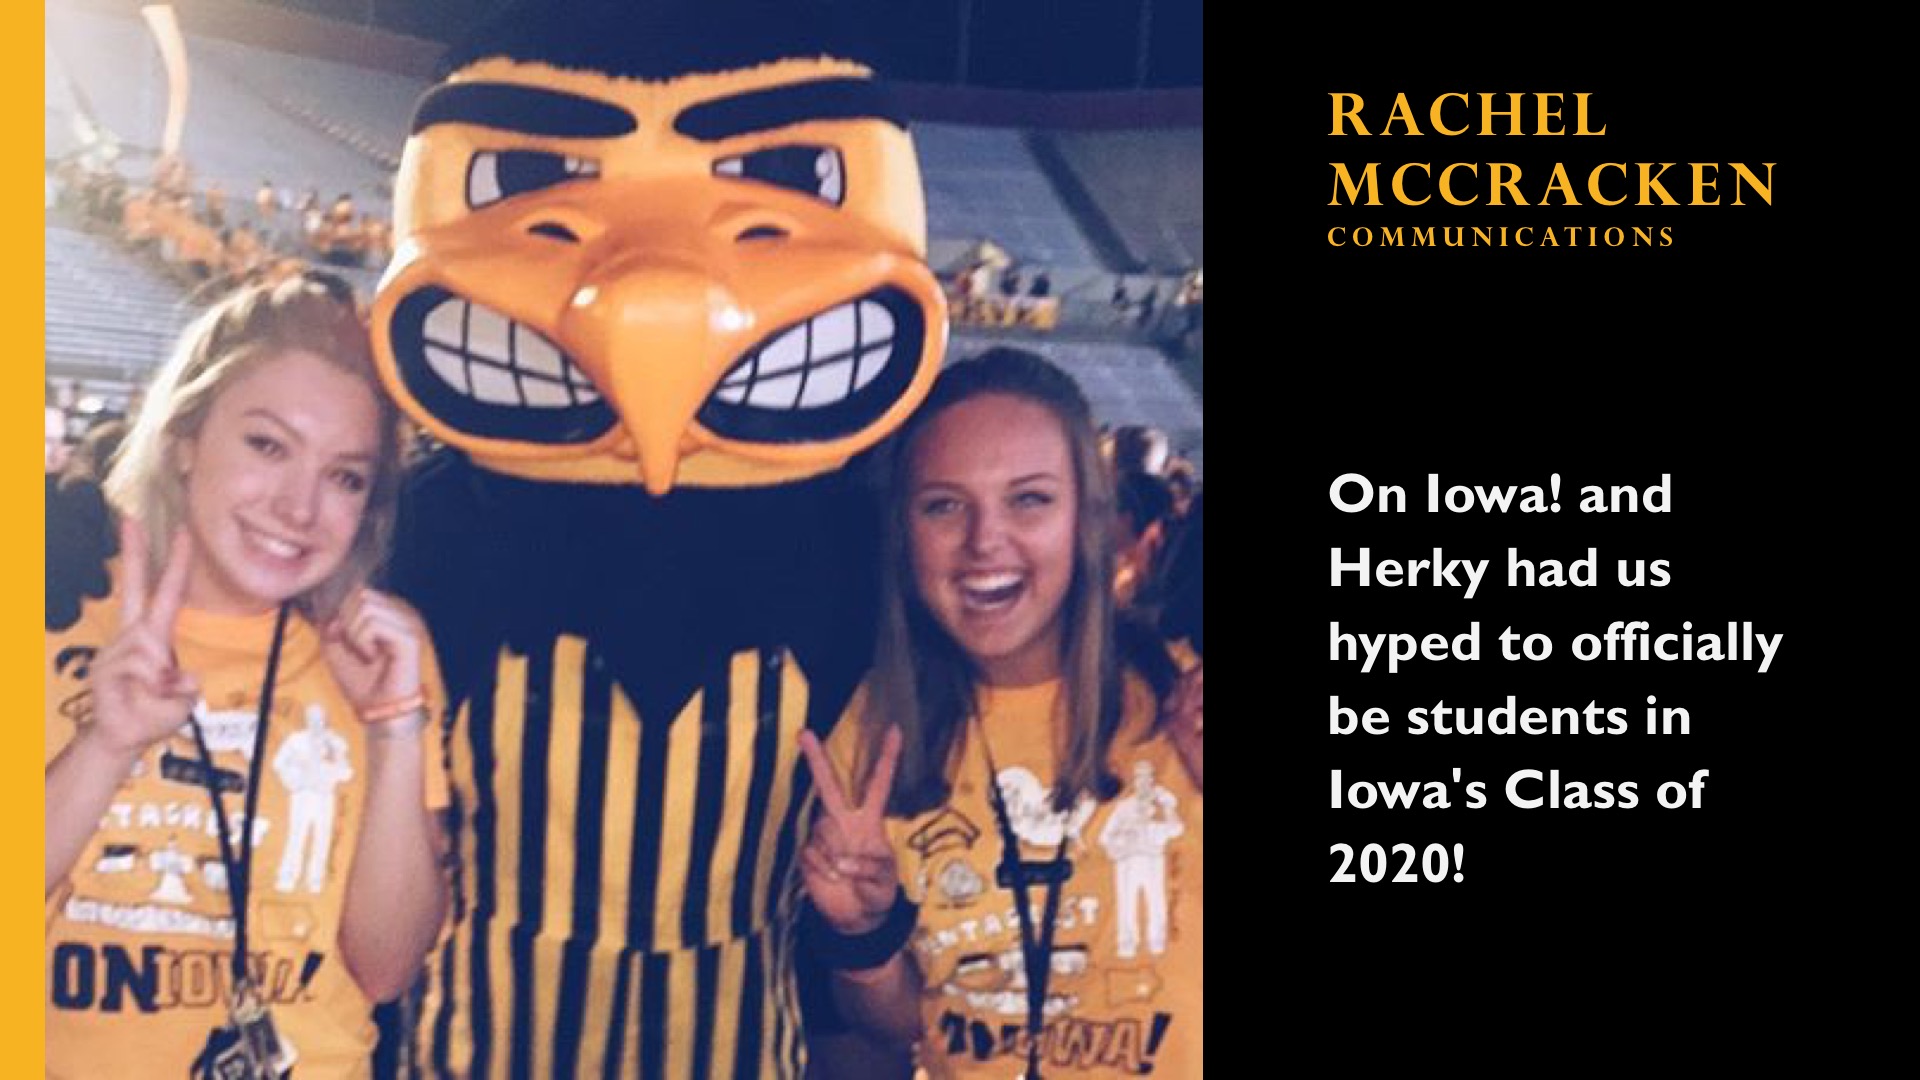 Rachel McCracken. Communications. On Iowa! and Herky had us hyped to officially be students in Iowa's Class of 2020!